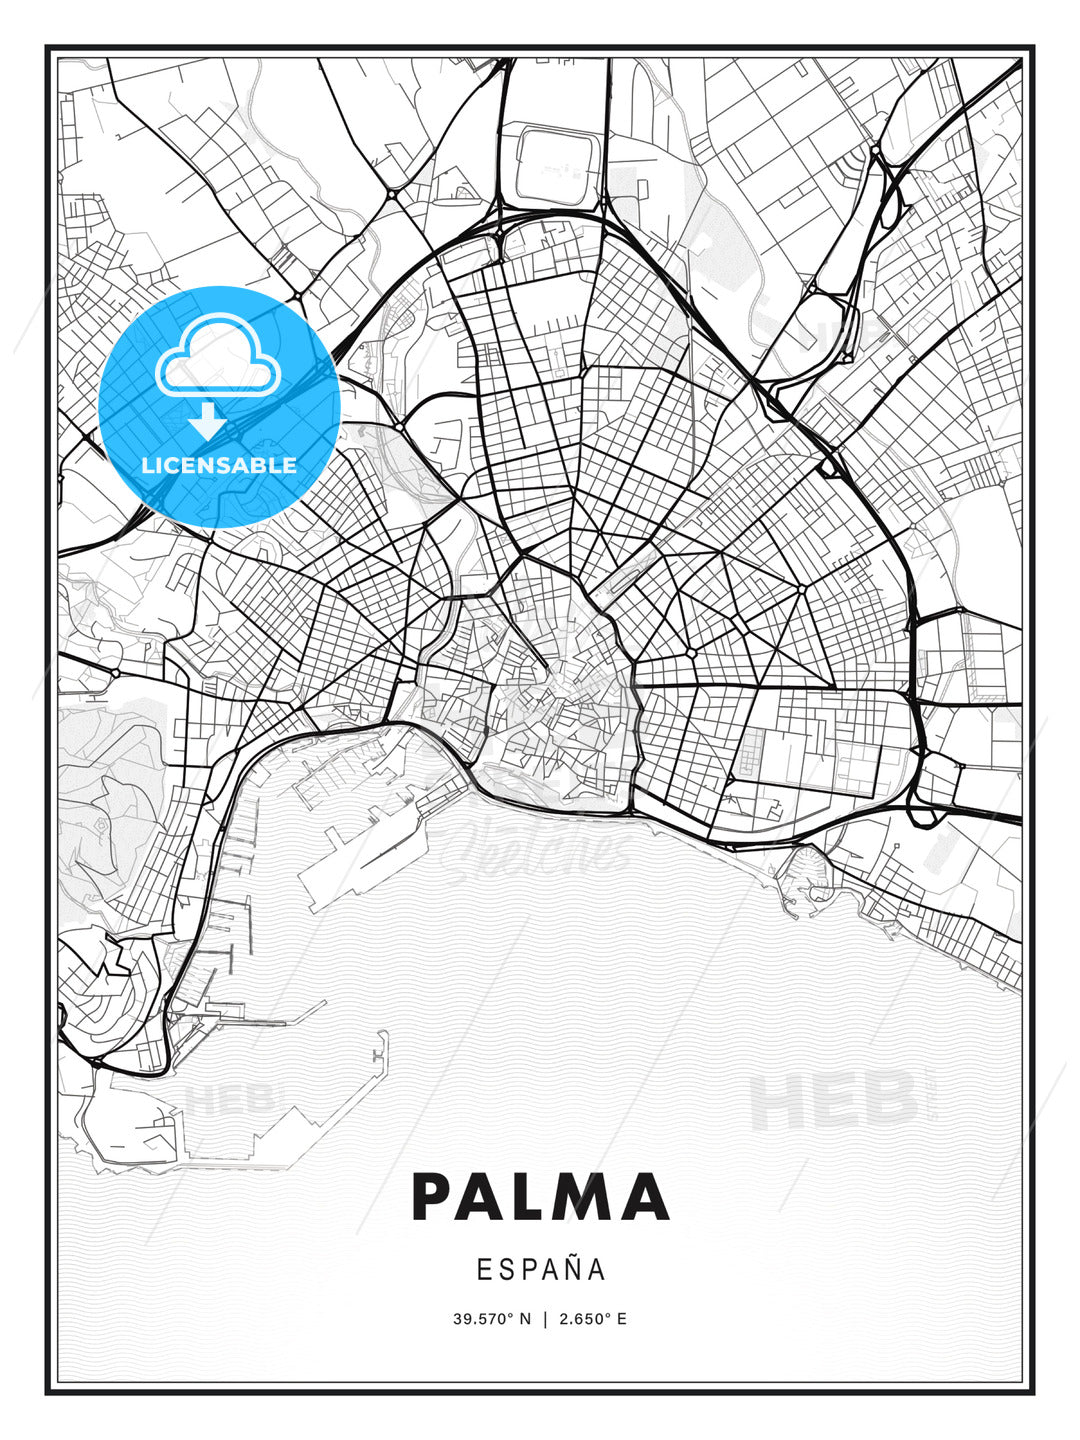 Palma, Spain, Modern Print Template in Various Formats - HEBSTREITS Sketches